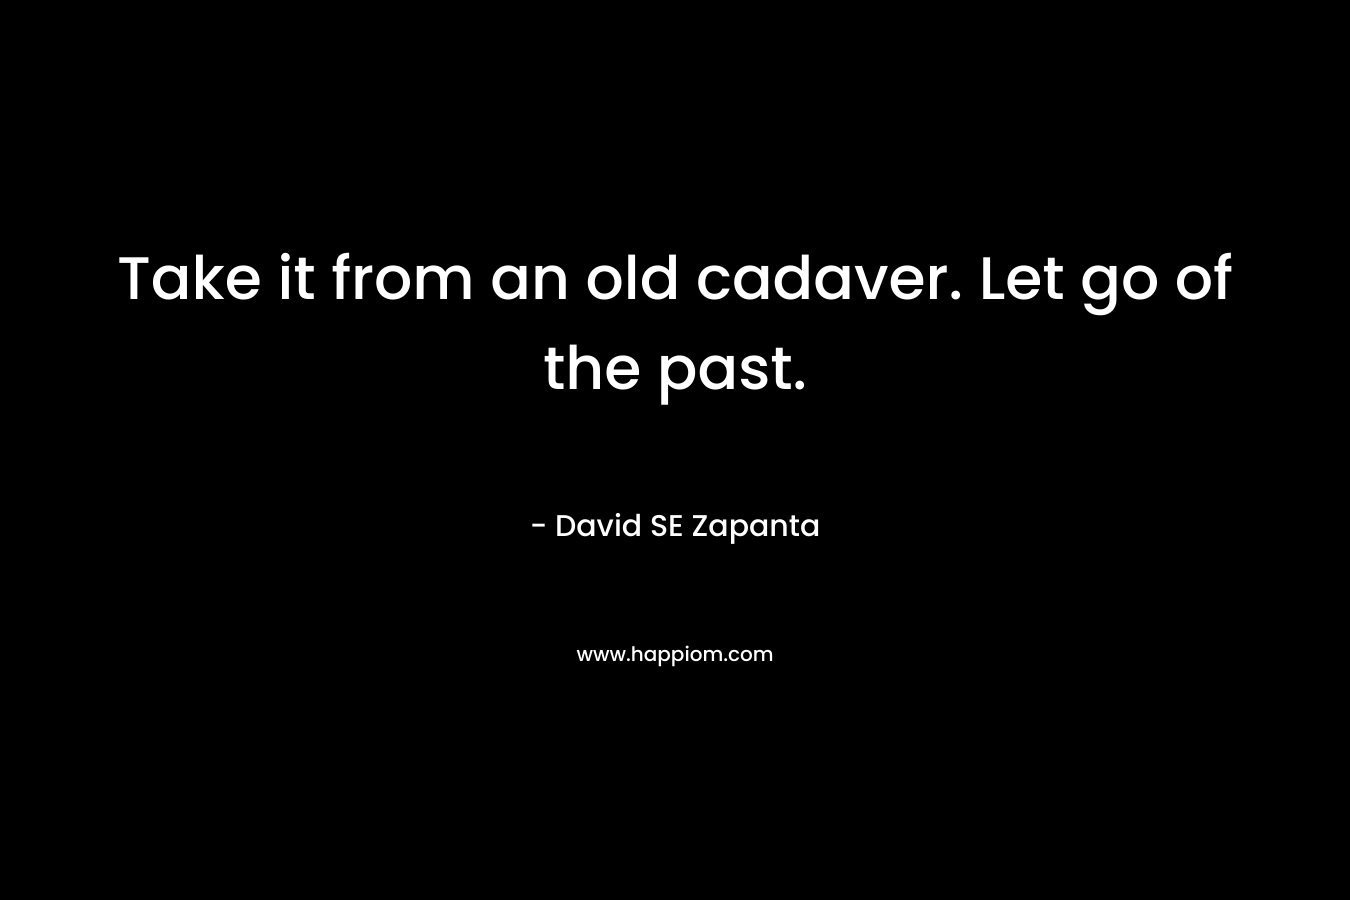 Take it from an old cadaver. Let go of the past.